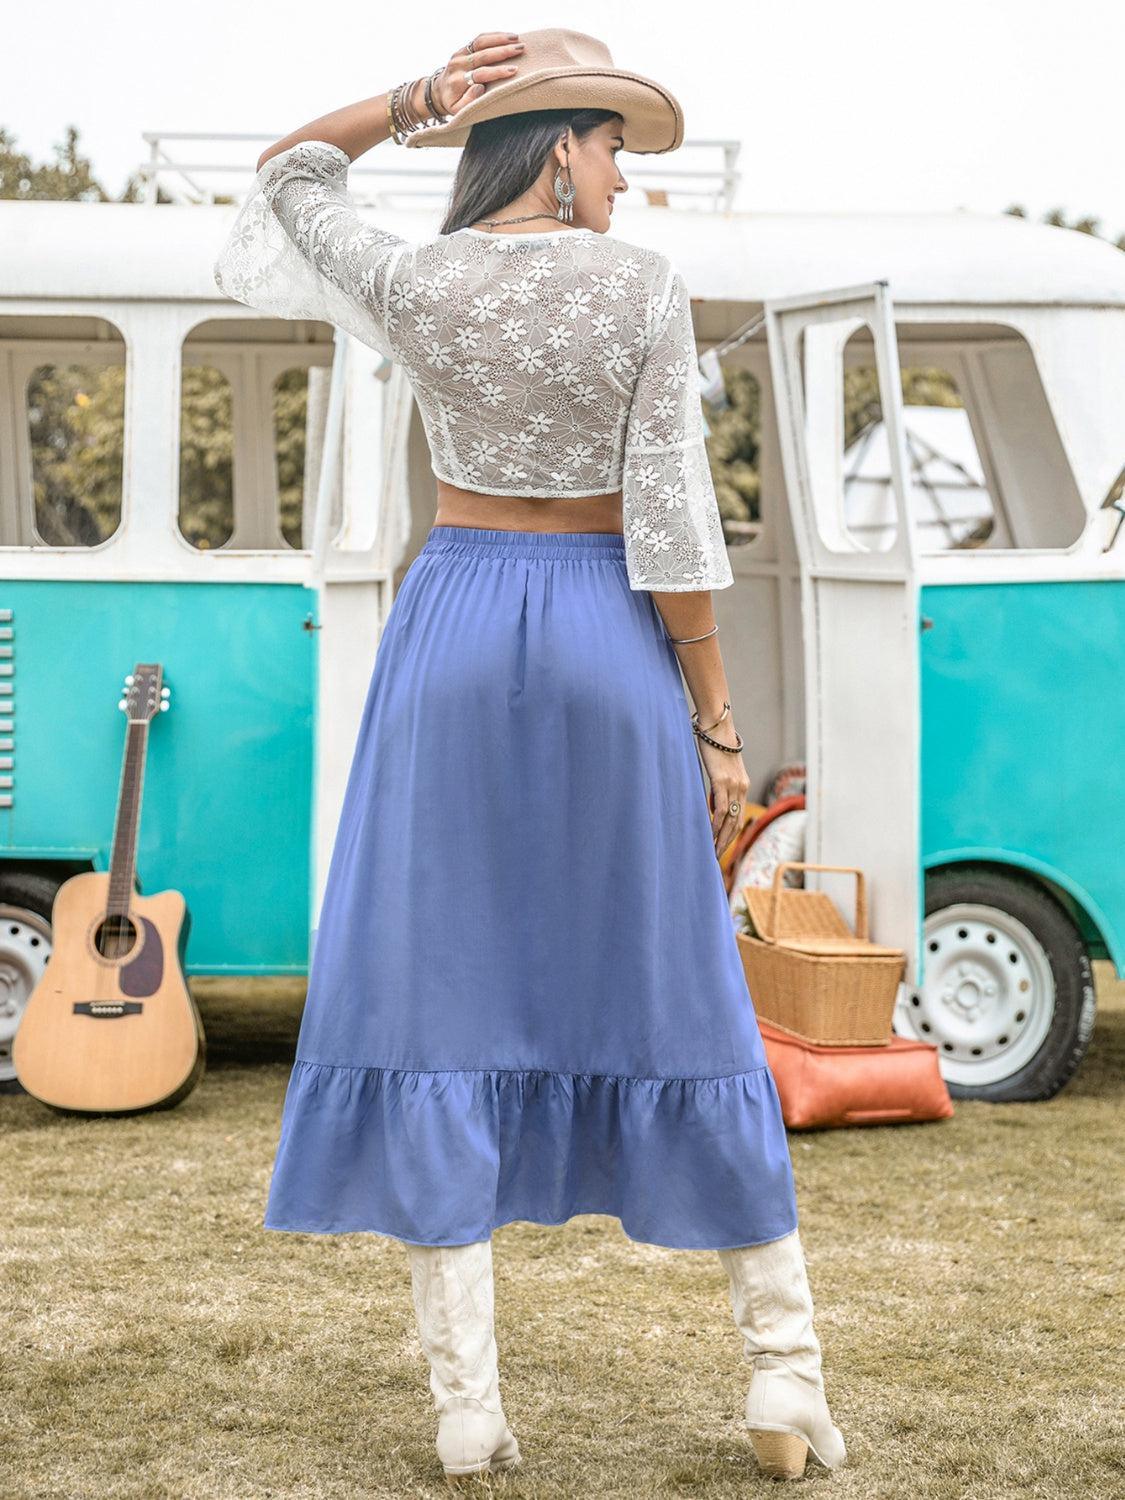 a woman wearing a blue skirt and a white top